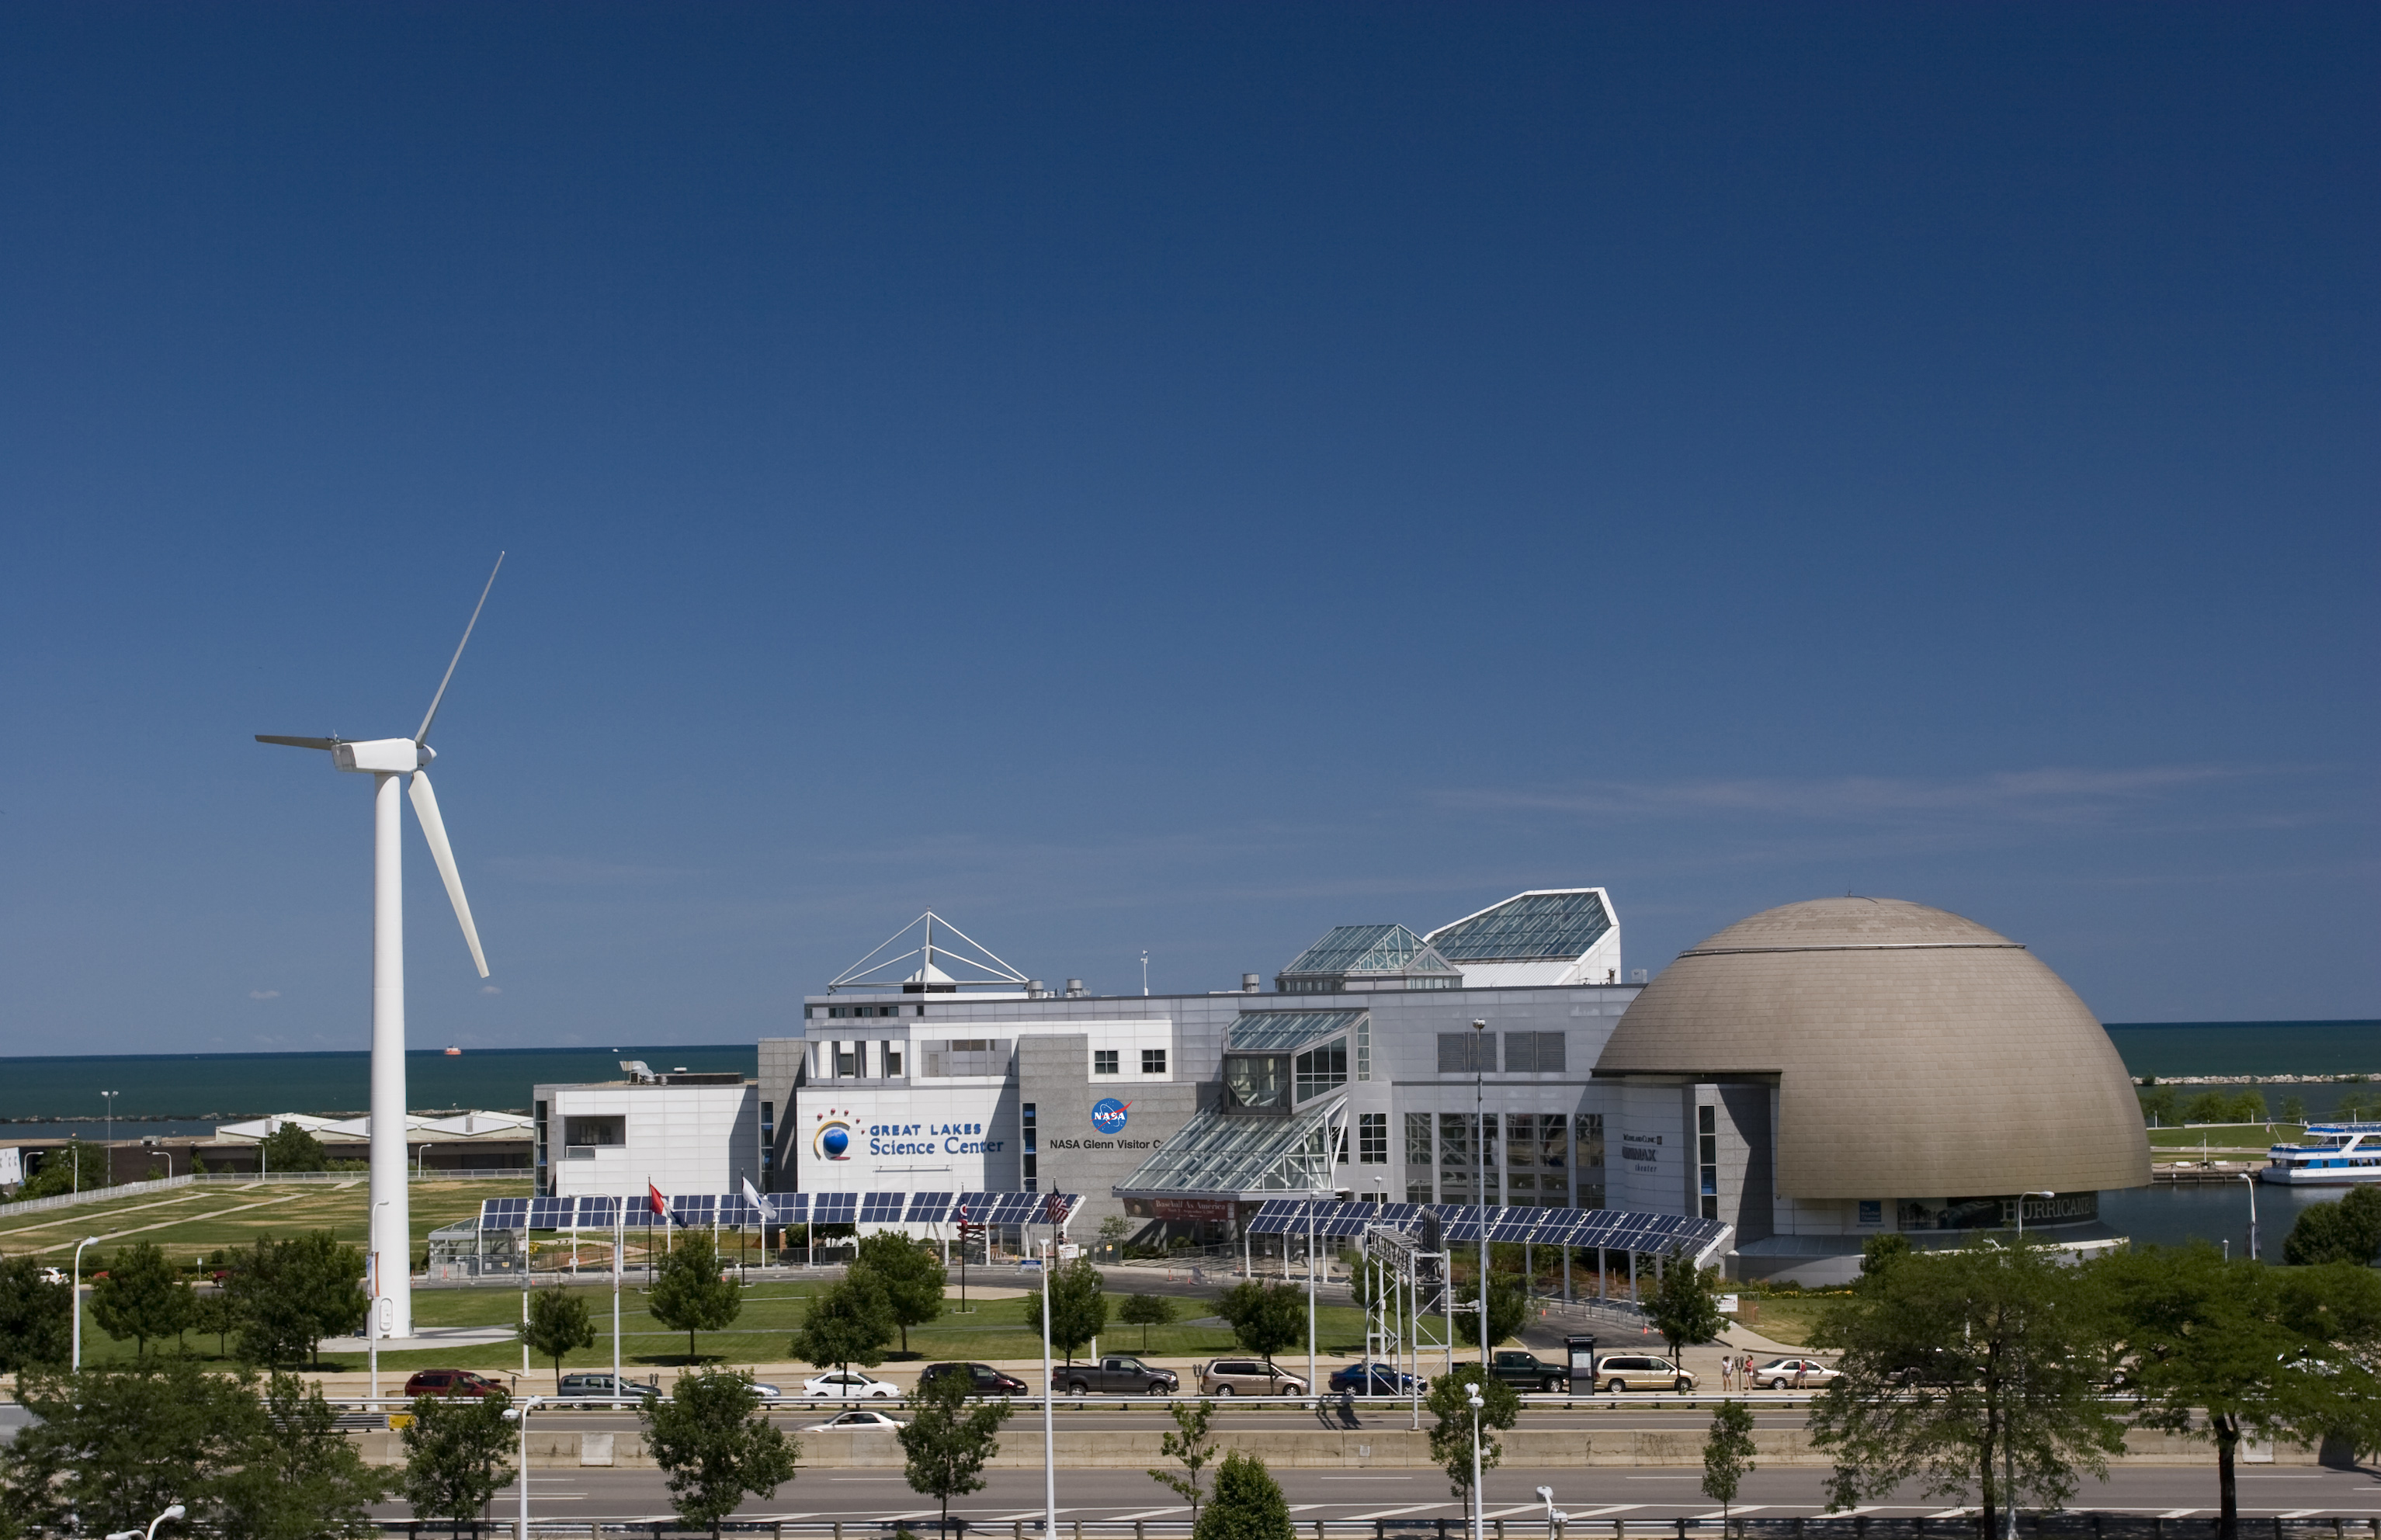 Science Center and NOPEC collaborate to launch new hands-on wind turbine exhibit